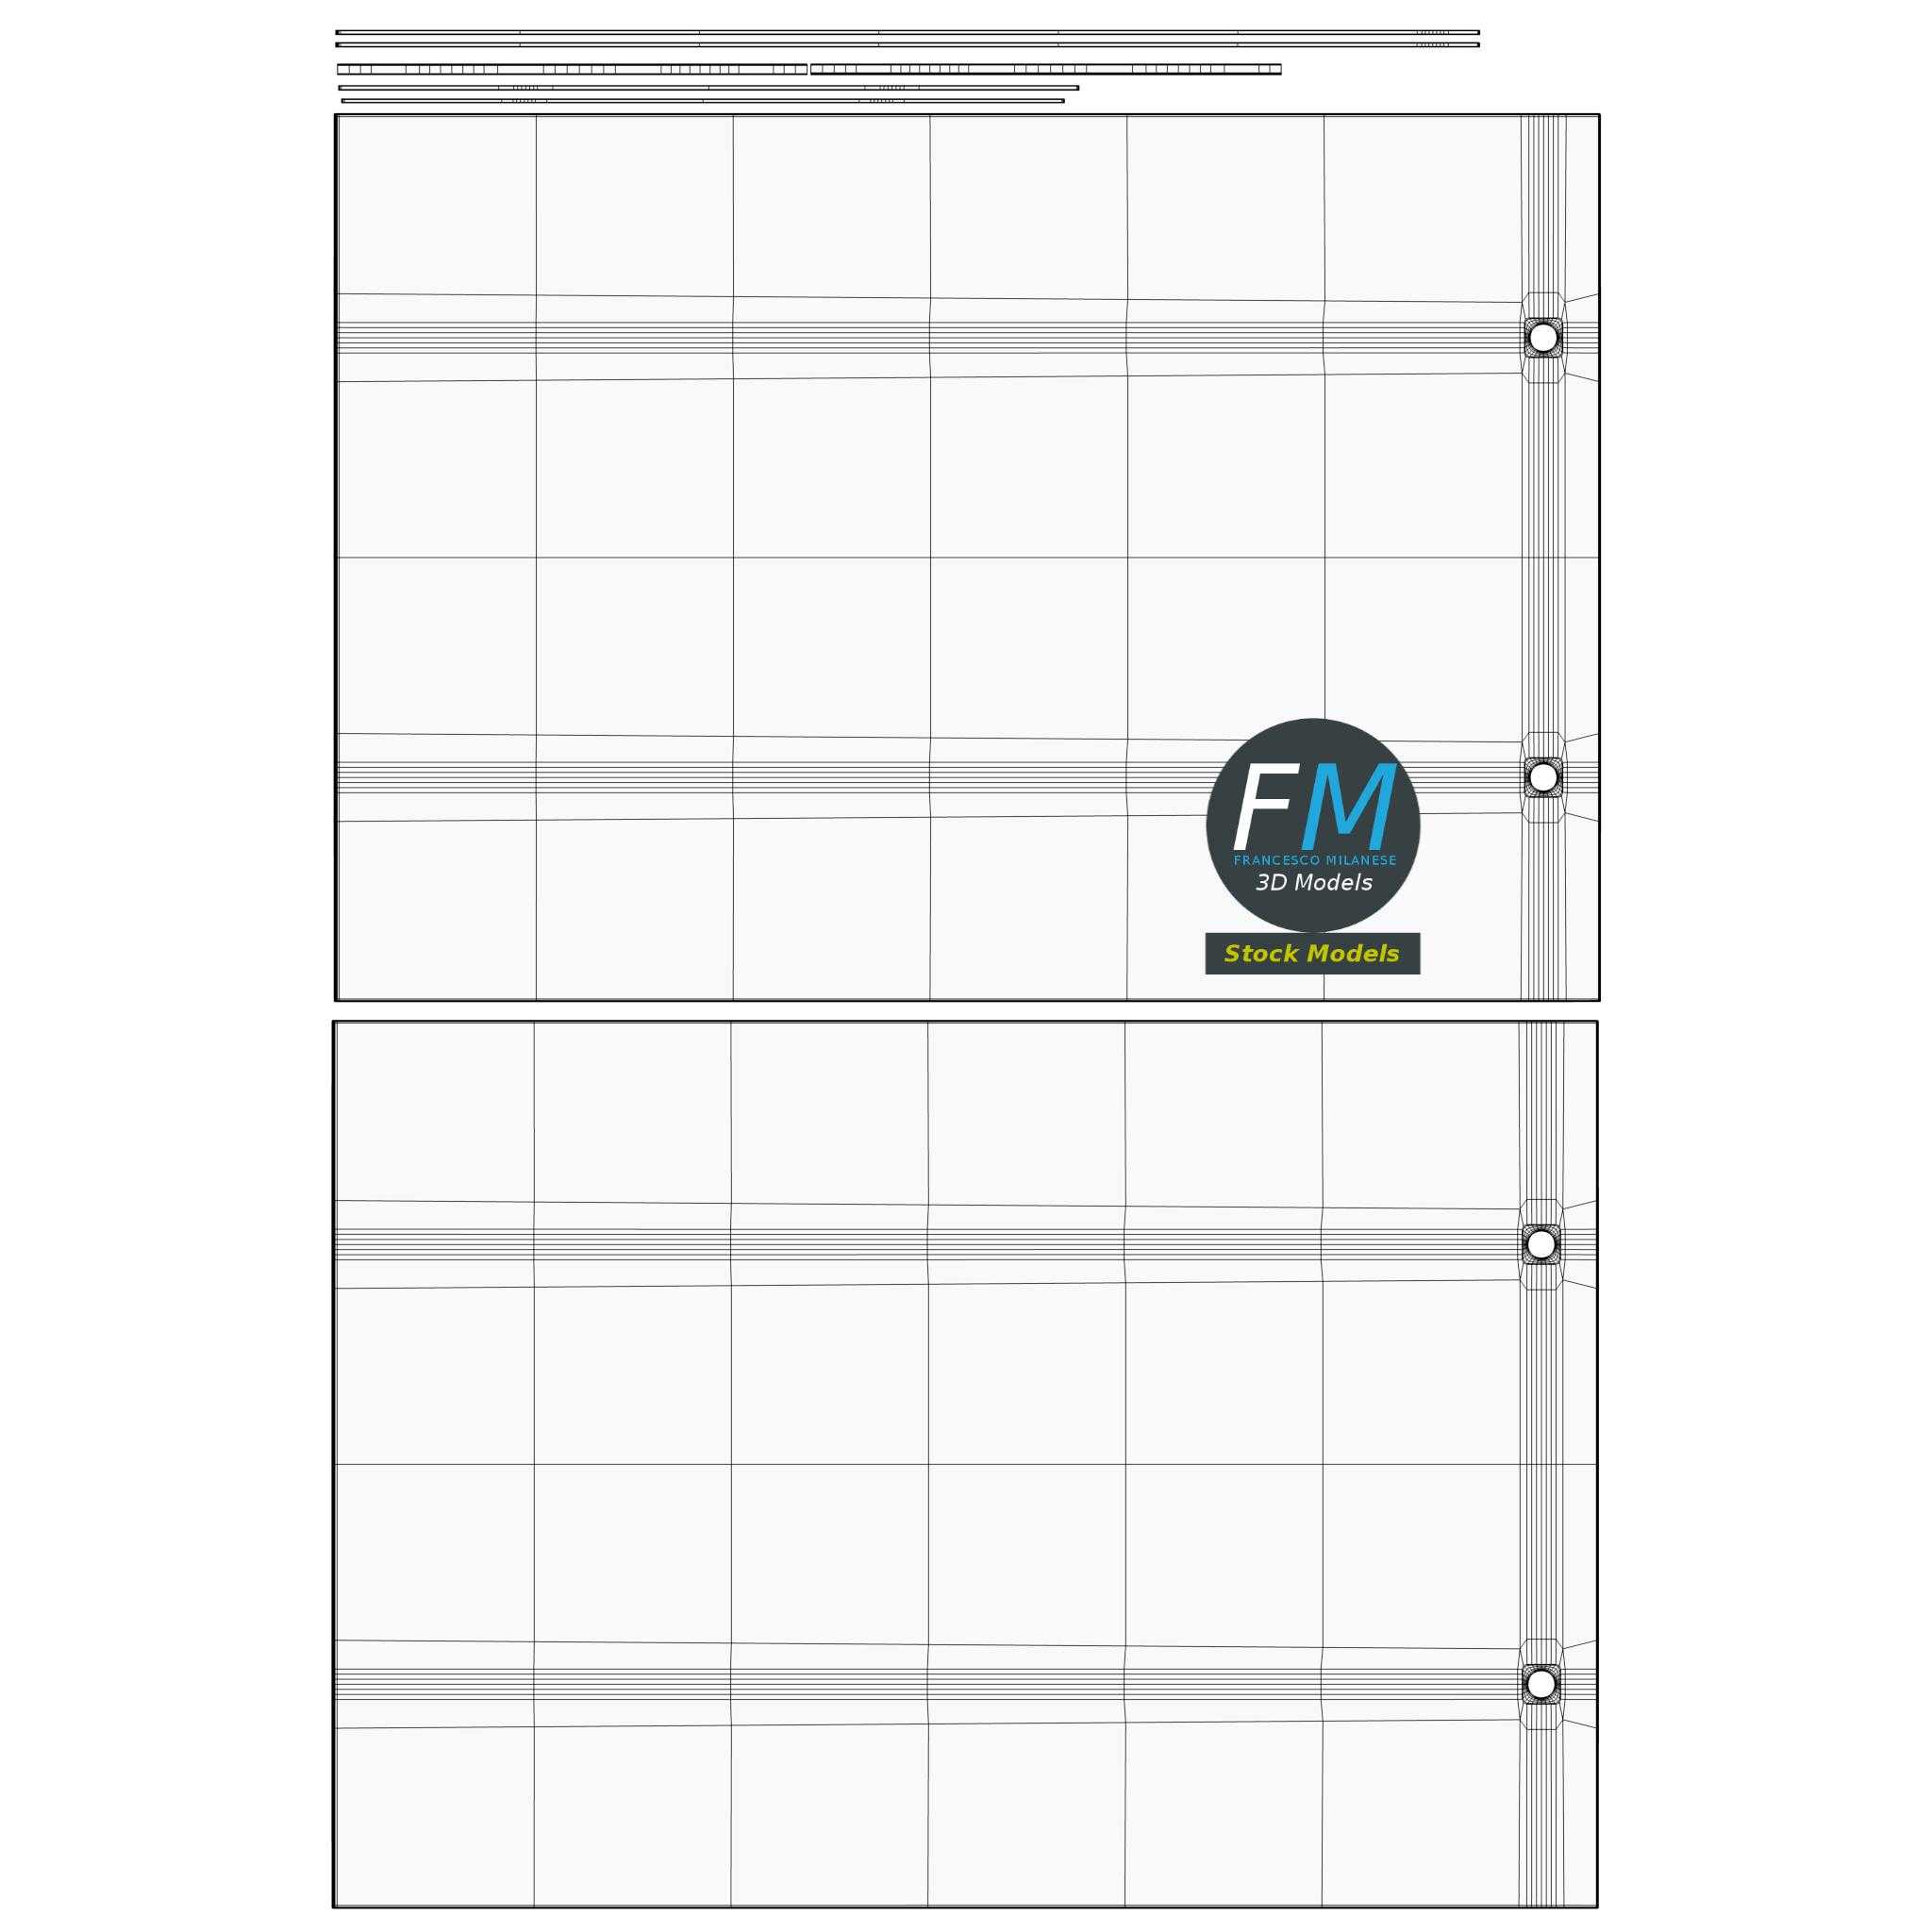 034 Template Ideas Tent Cards Table 2 Microsoft Word Intended For Tent Card Template Word